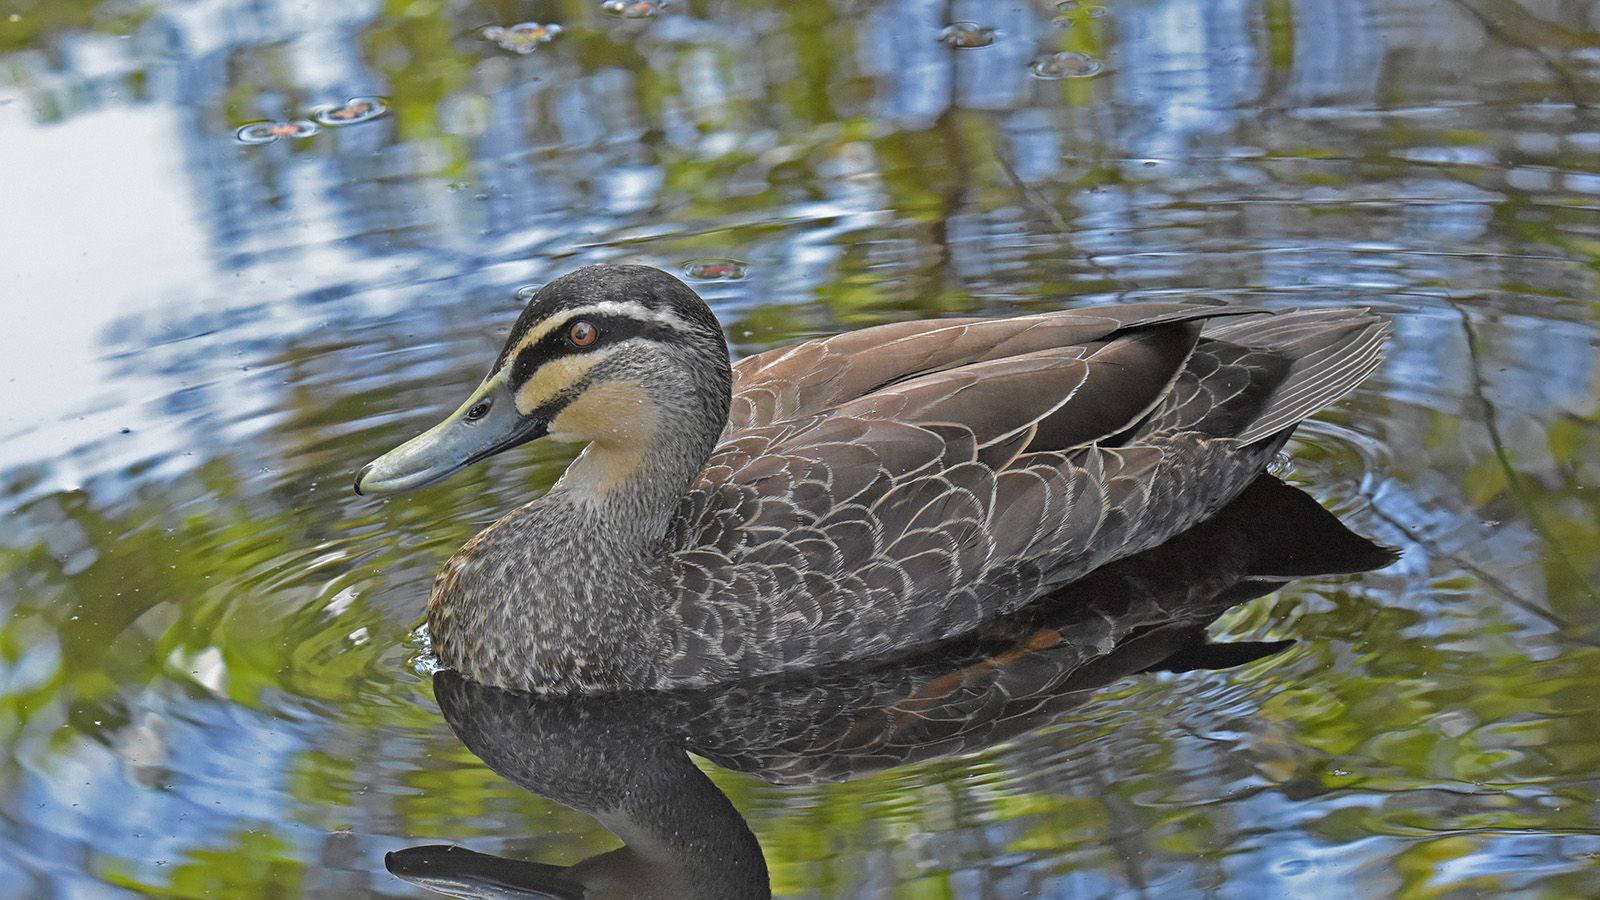 A black duck swimming in water that is reflecting leaves and the sky from above. banner image